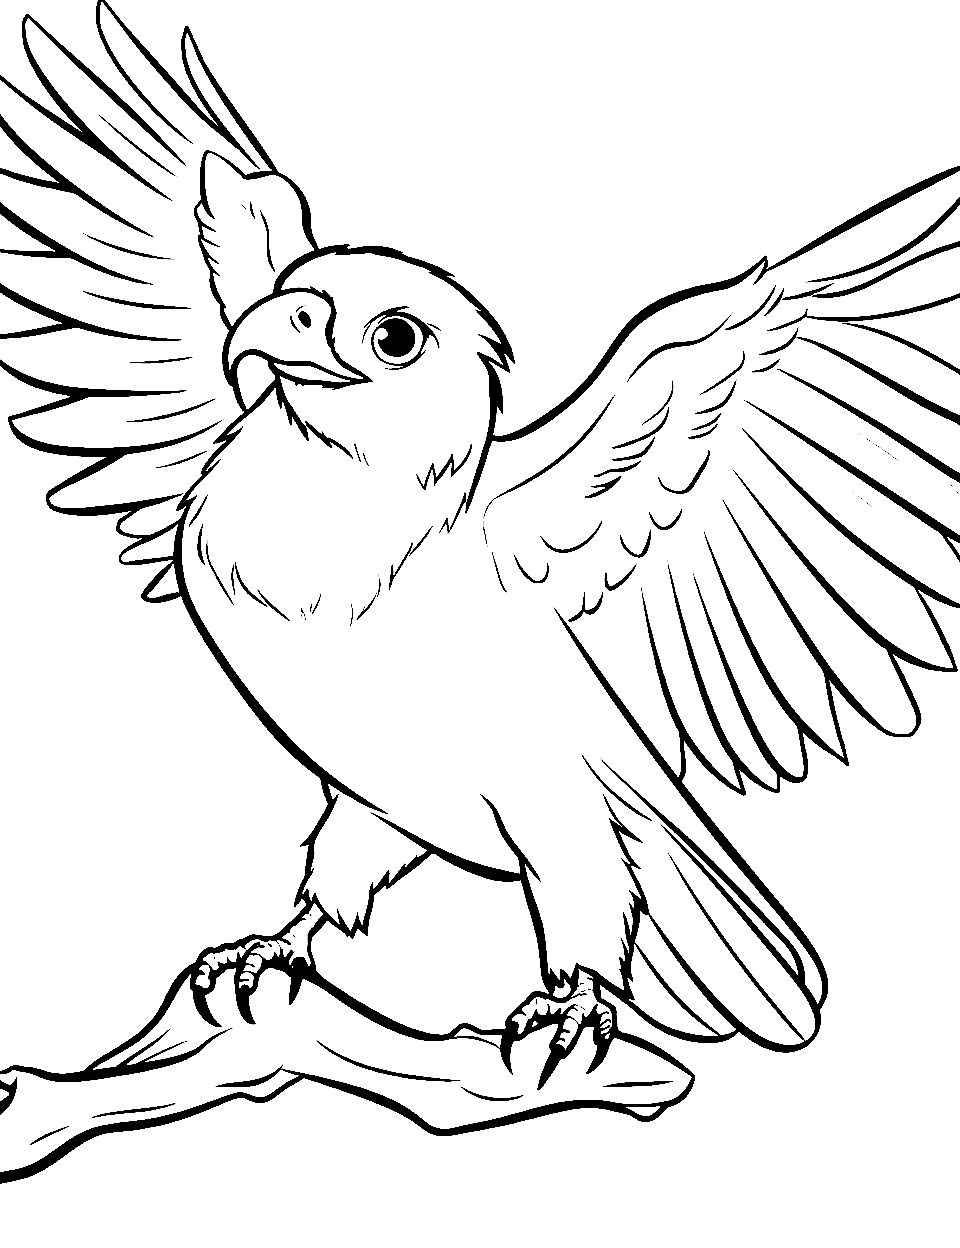 Baby Eagle Learning to Fly Coloring Page - A young eagle testing its wings against the wind.